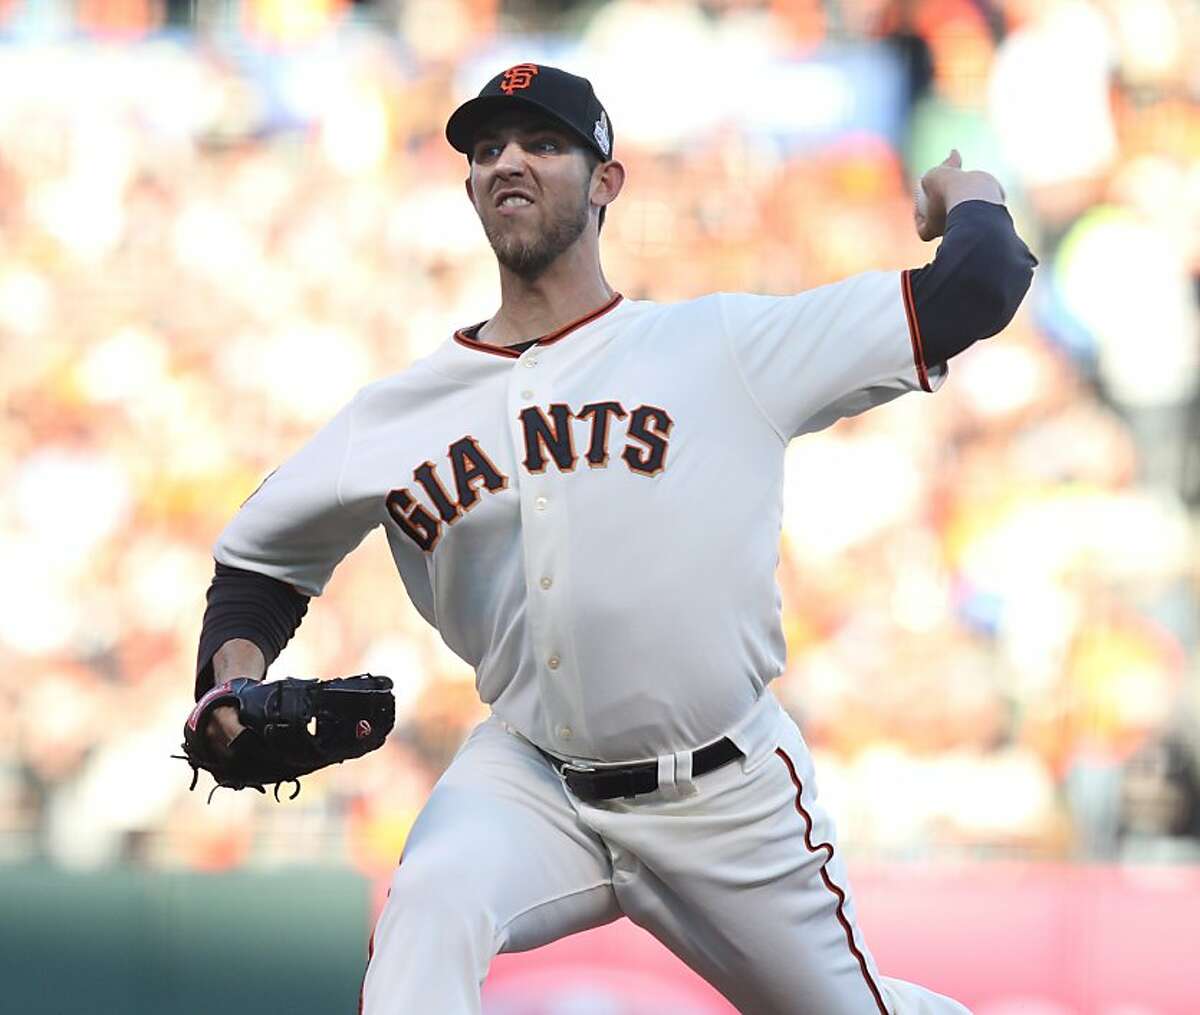 Giants' pitcher Madison Bumgarner throws in the 1st inning during game 2 of the World Series at AT&T Park on Thursday, Oct. 25, 2012 in San Francisco, Calif.